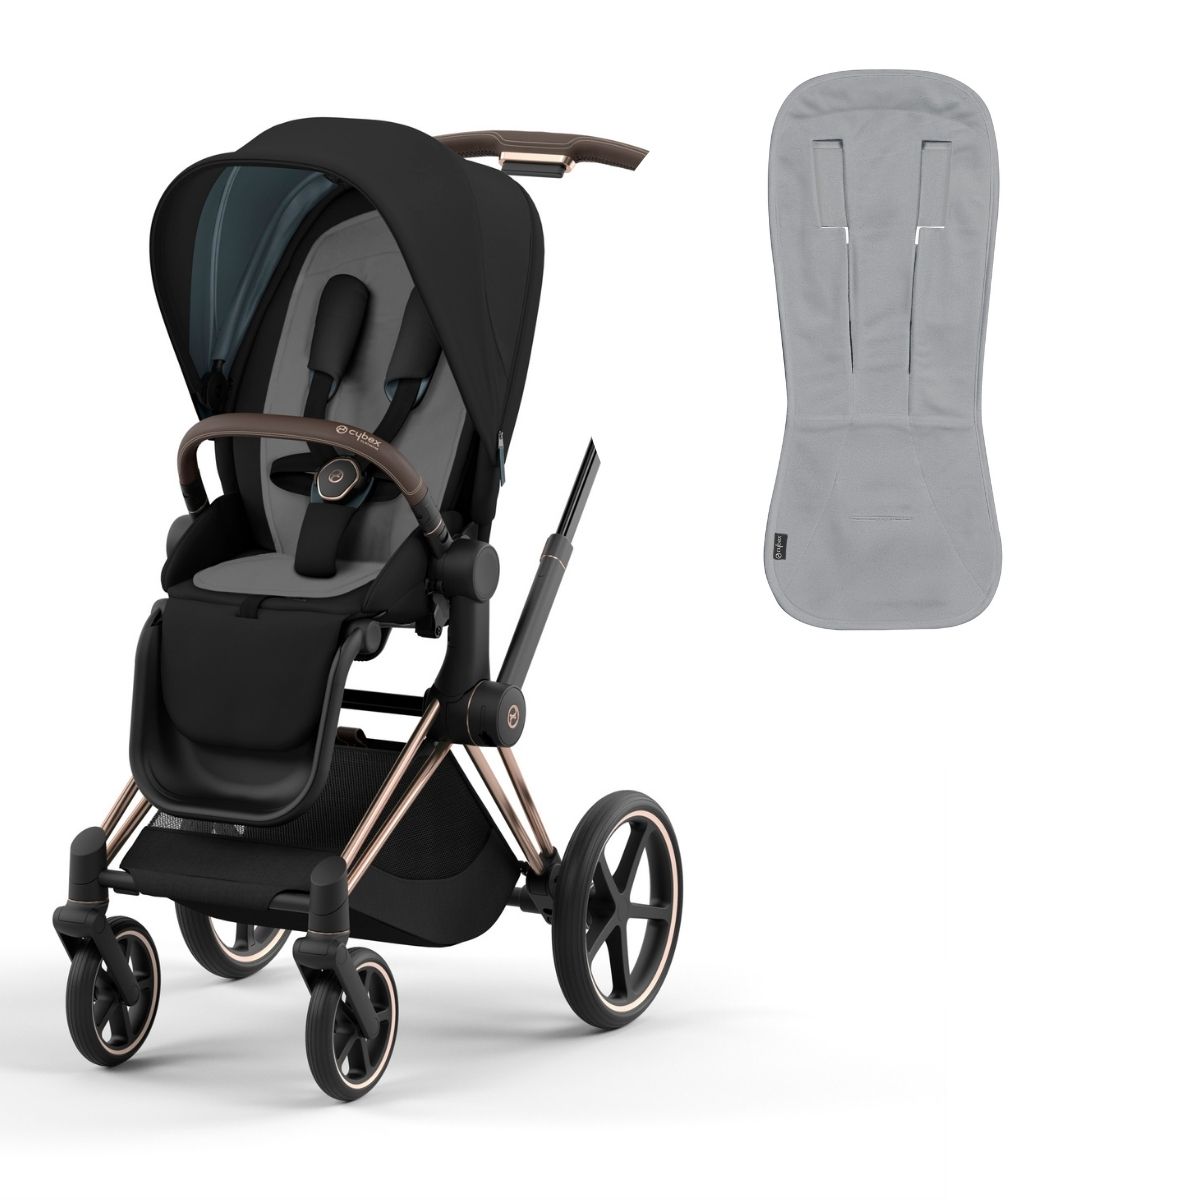 Cybex summer seat pad for Cybex strollers